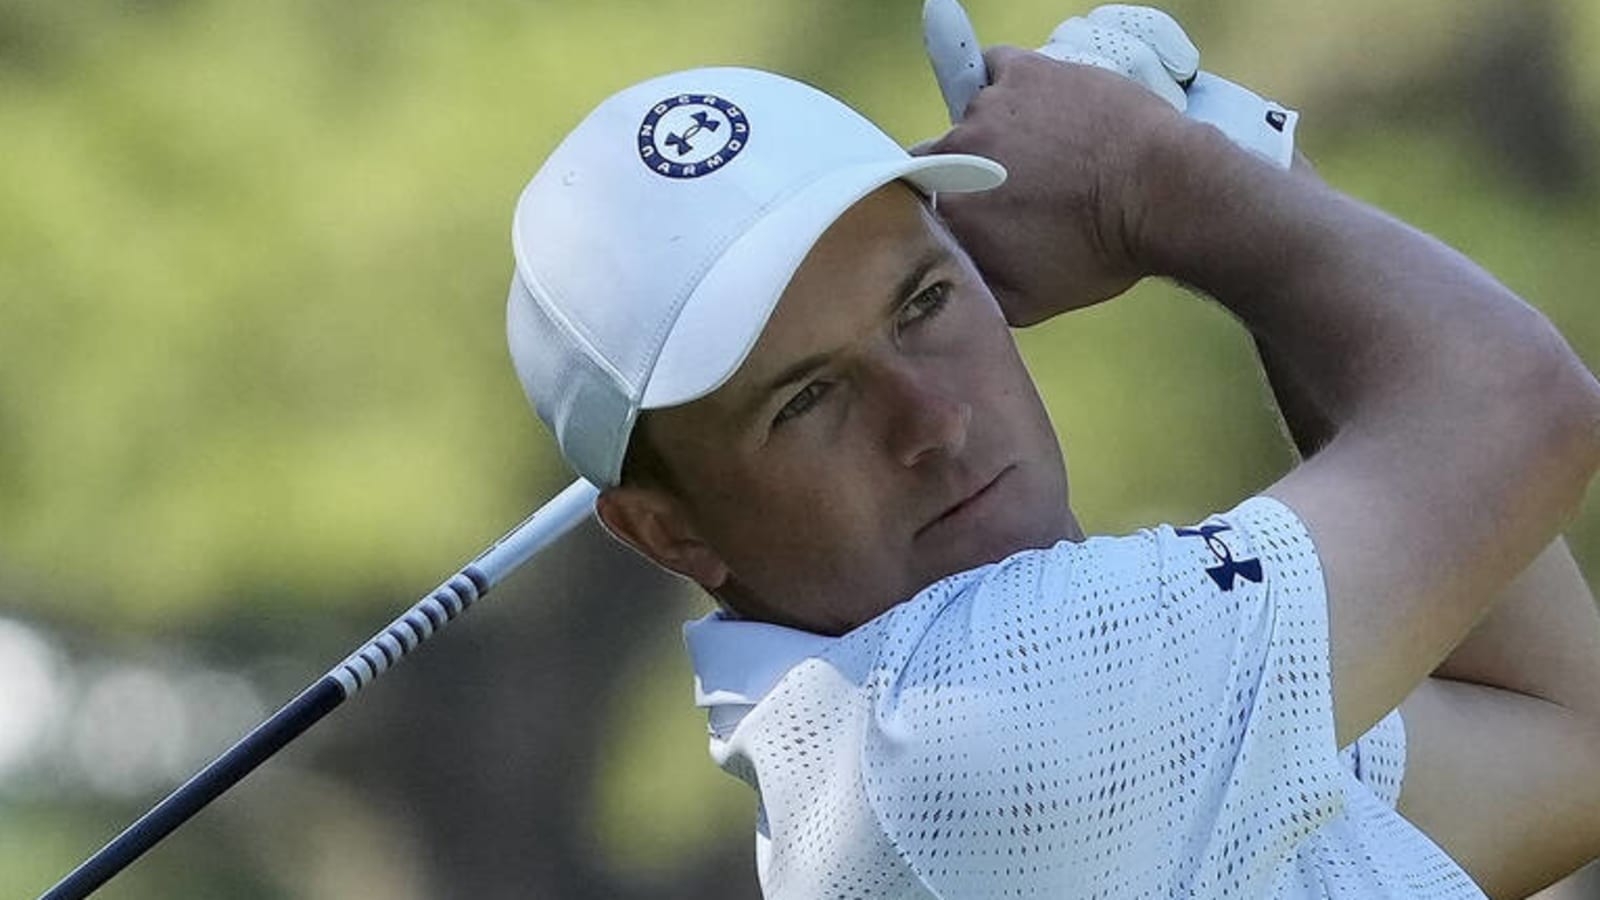 PGA Championship: Spieth's odds long as future is uncertain